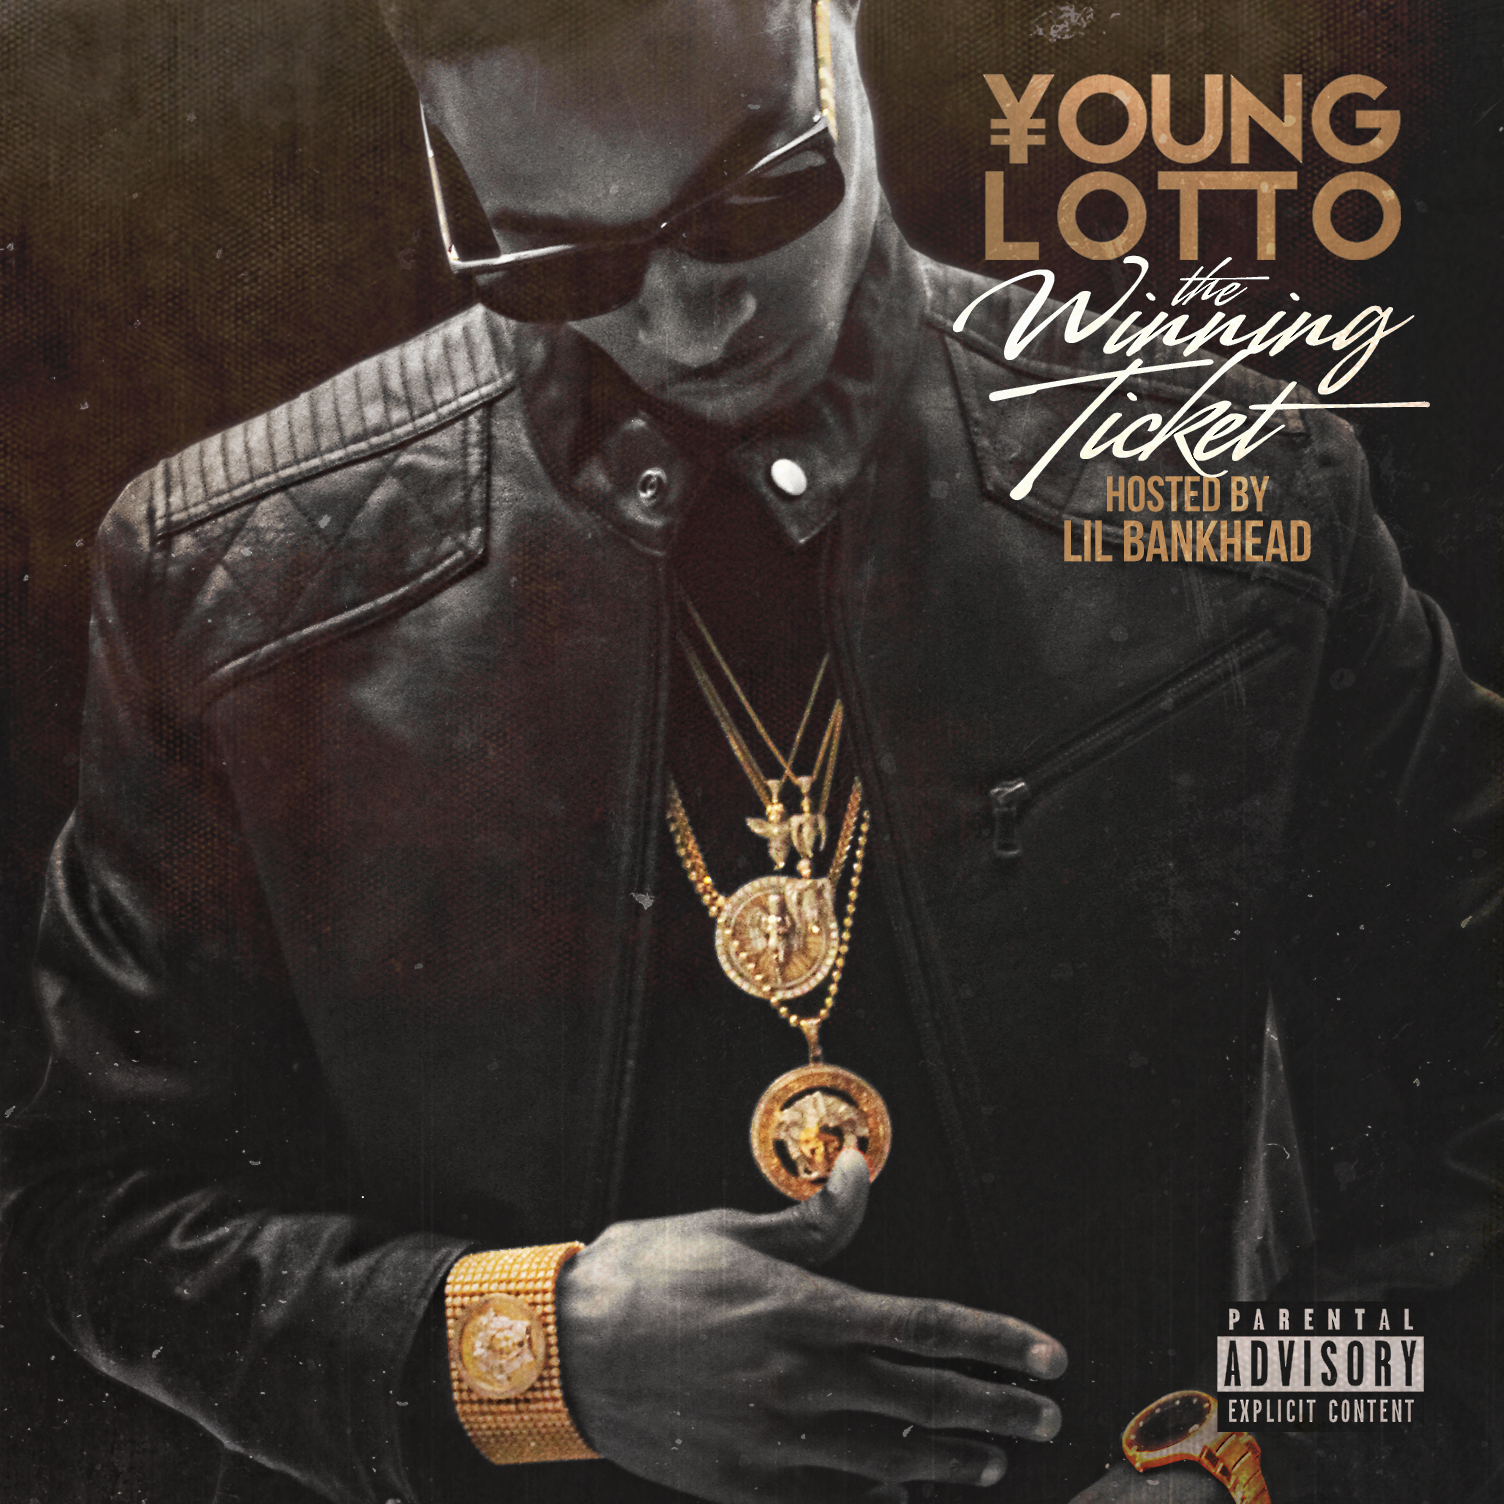 Young Lotto – The Winning Ticket